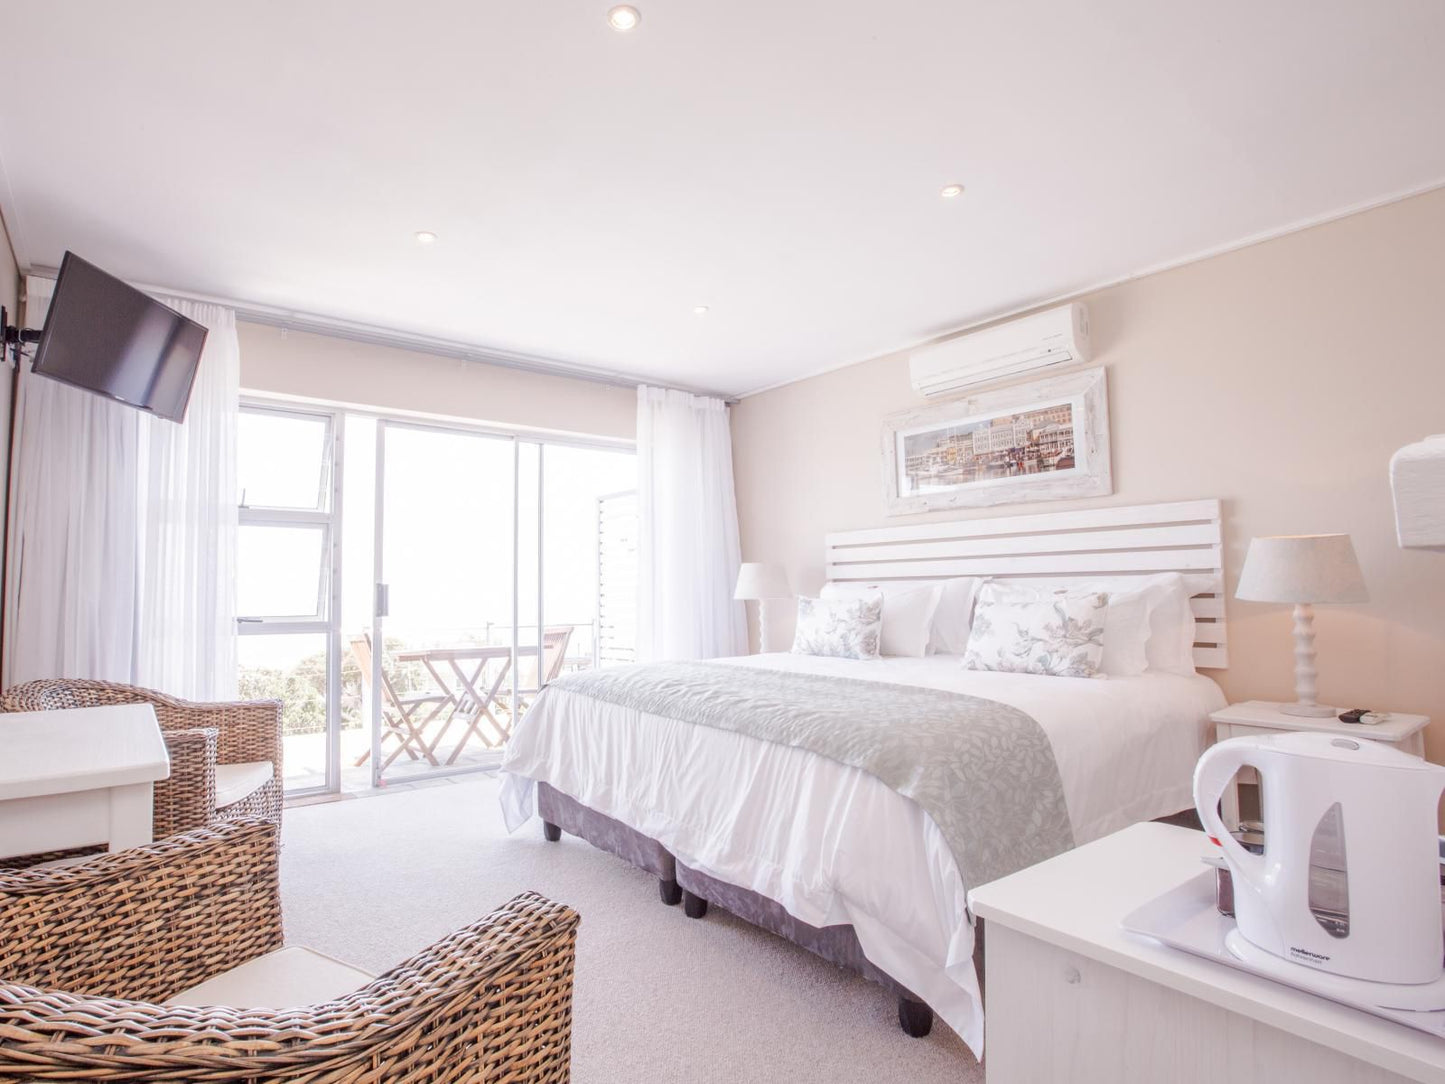 Finchley House Camps Bay Cape Town Western Cape South Africa Unsaturated, Bedroom